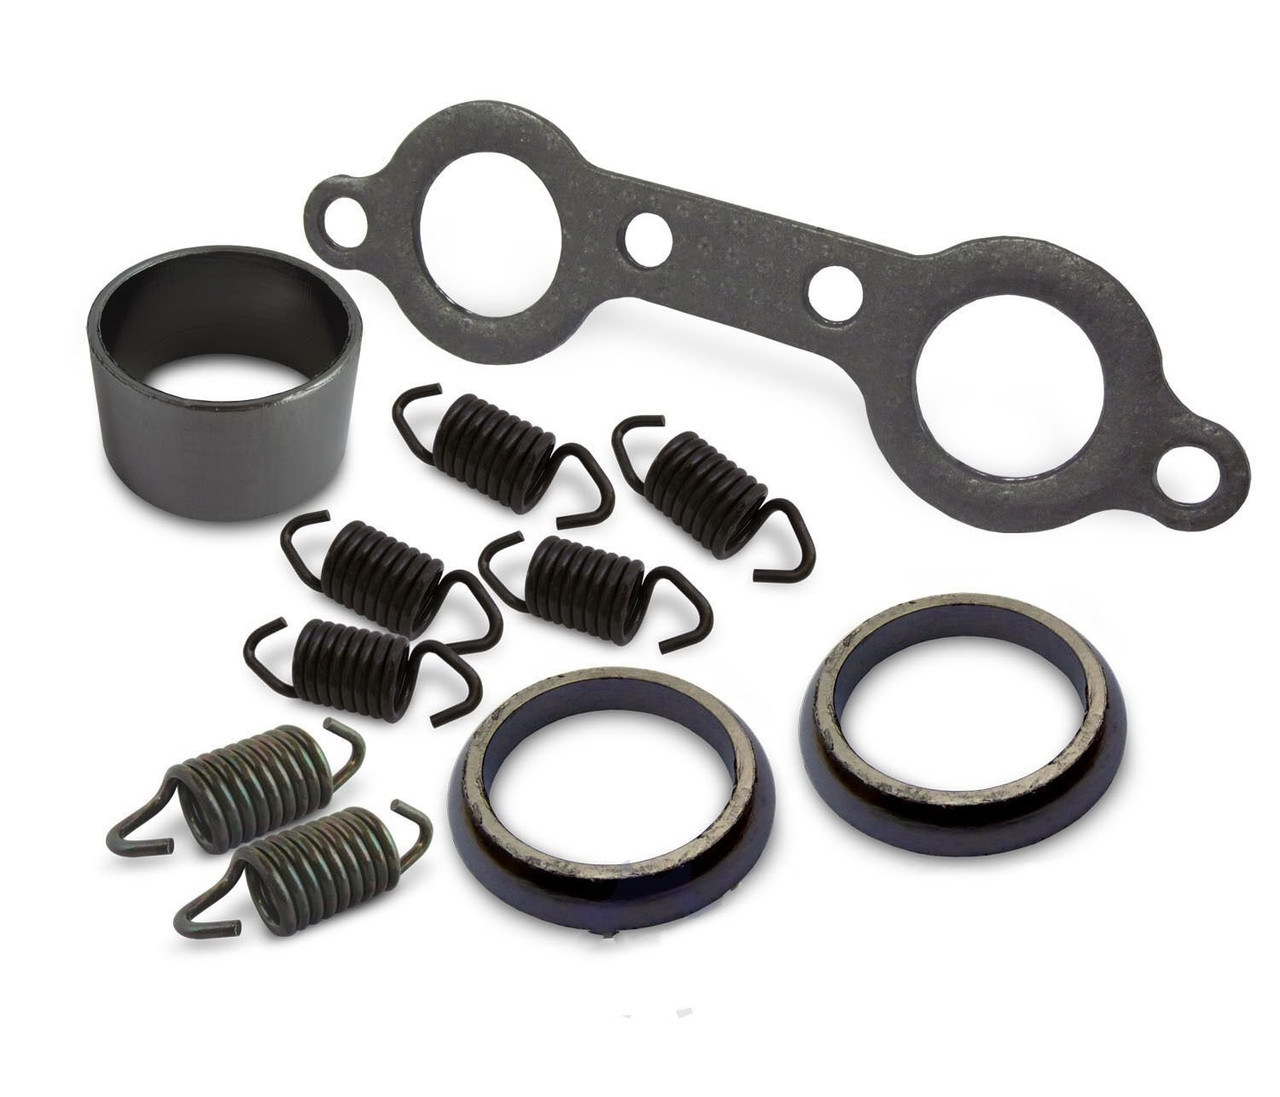 Polaris RZR 800 Exhaust Gaskets and Spring Kits by Quad Logic